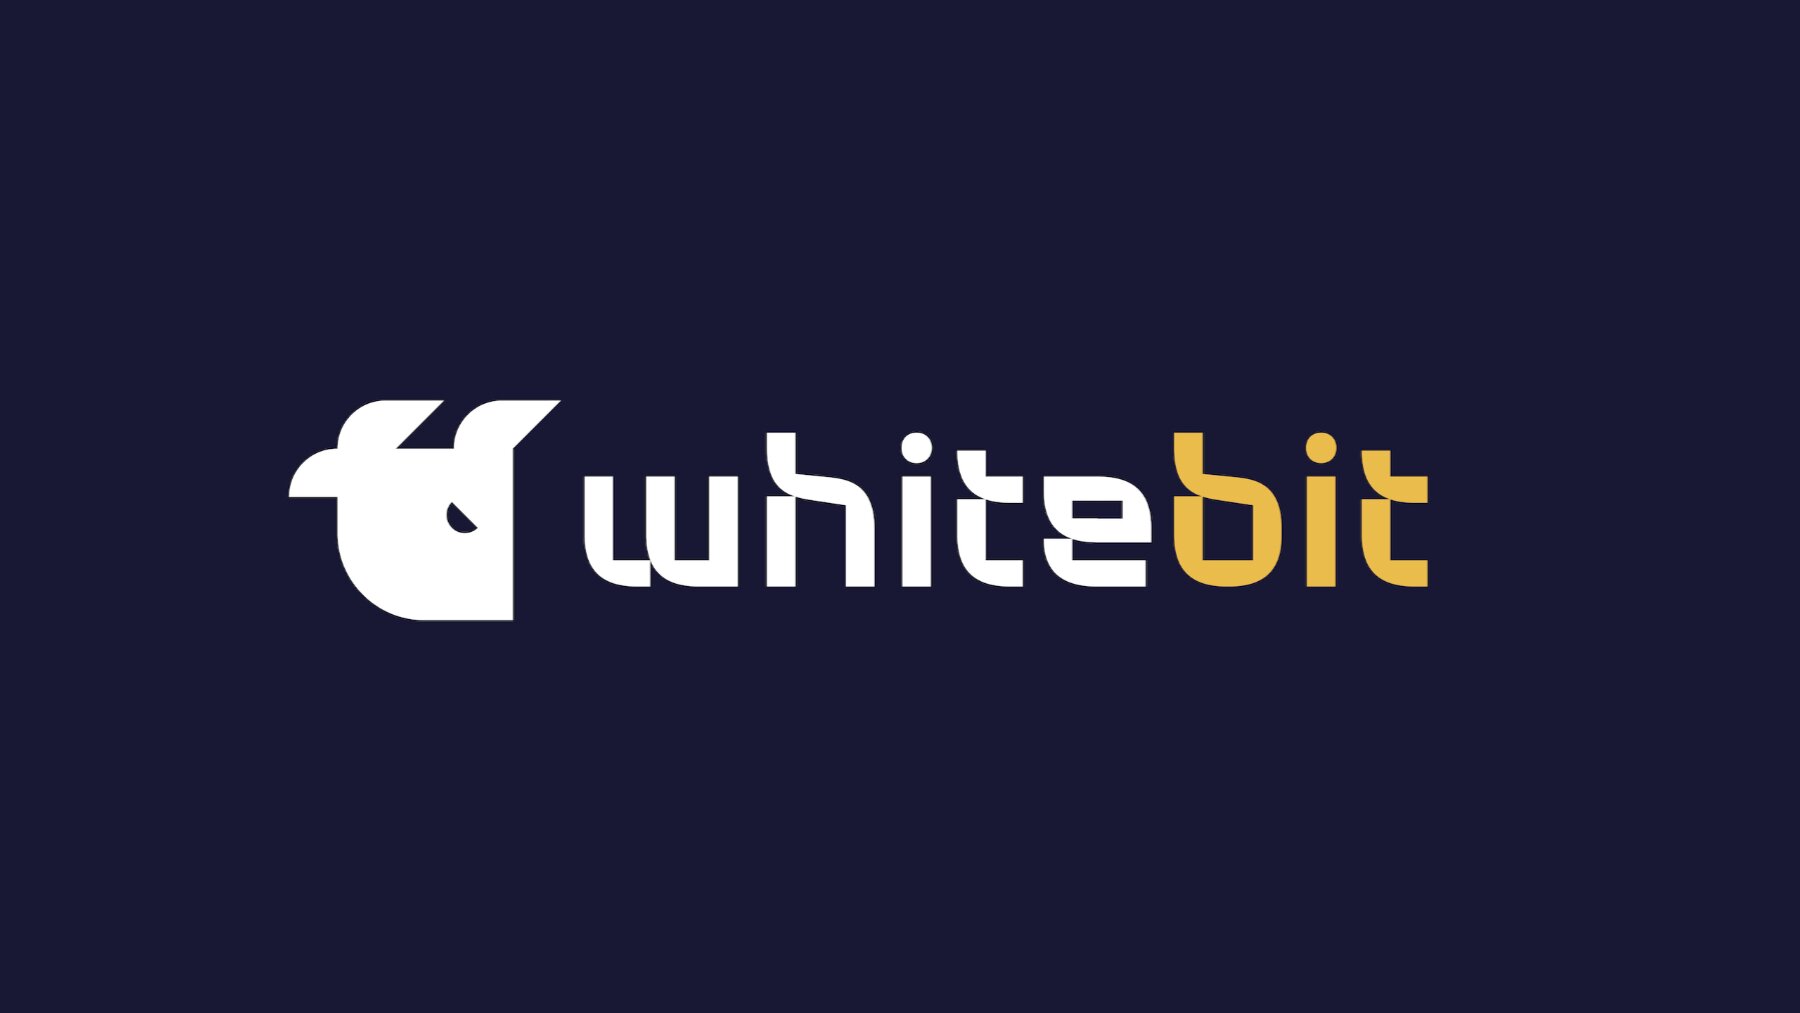 WhiteBIT Token’s Stellar Charge is Fizzling Out. Time to Hit the Exit?